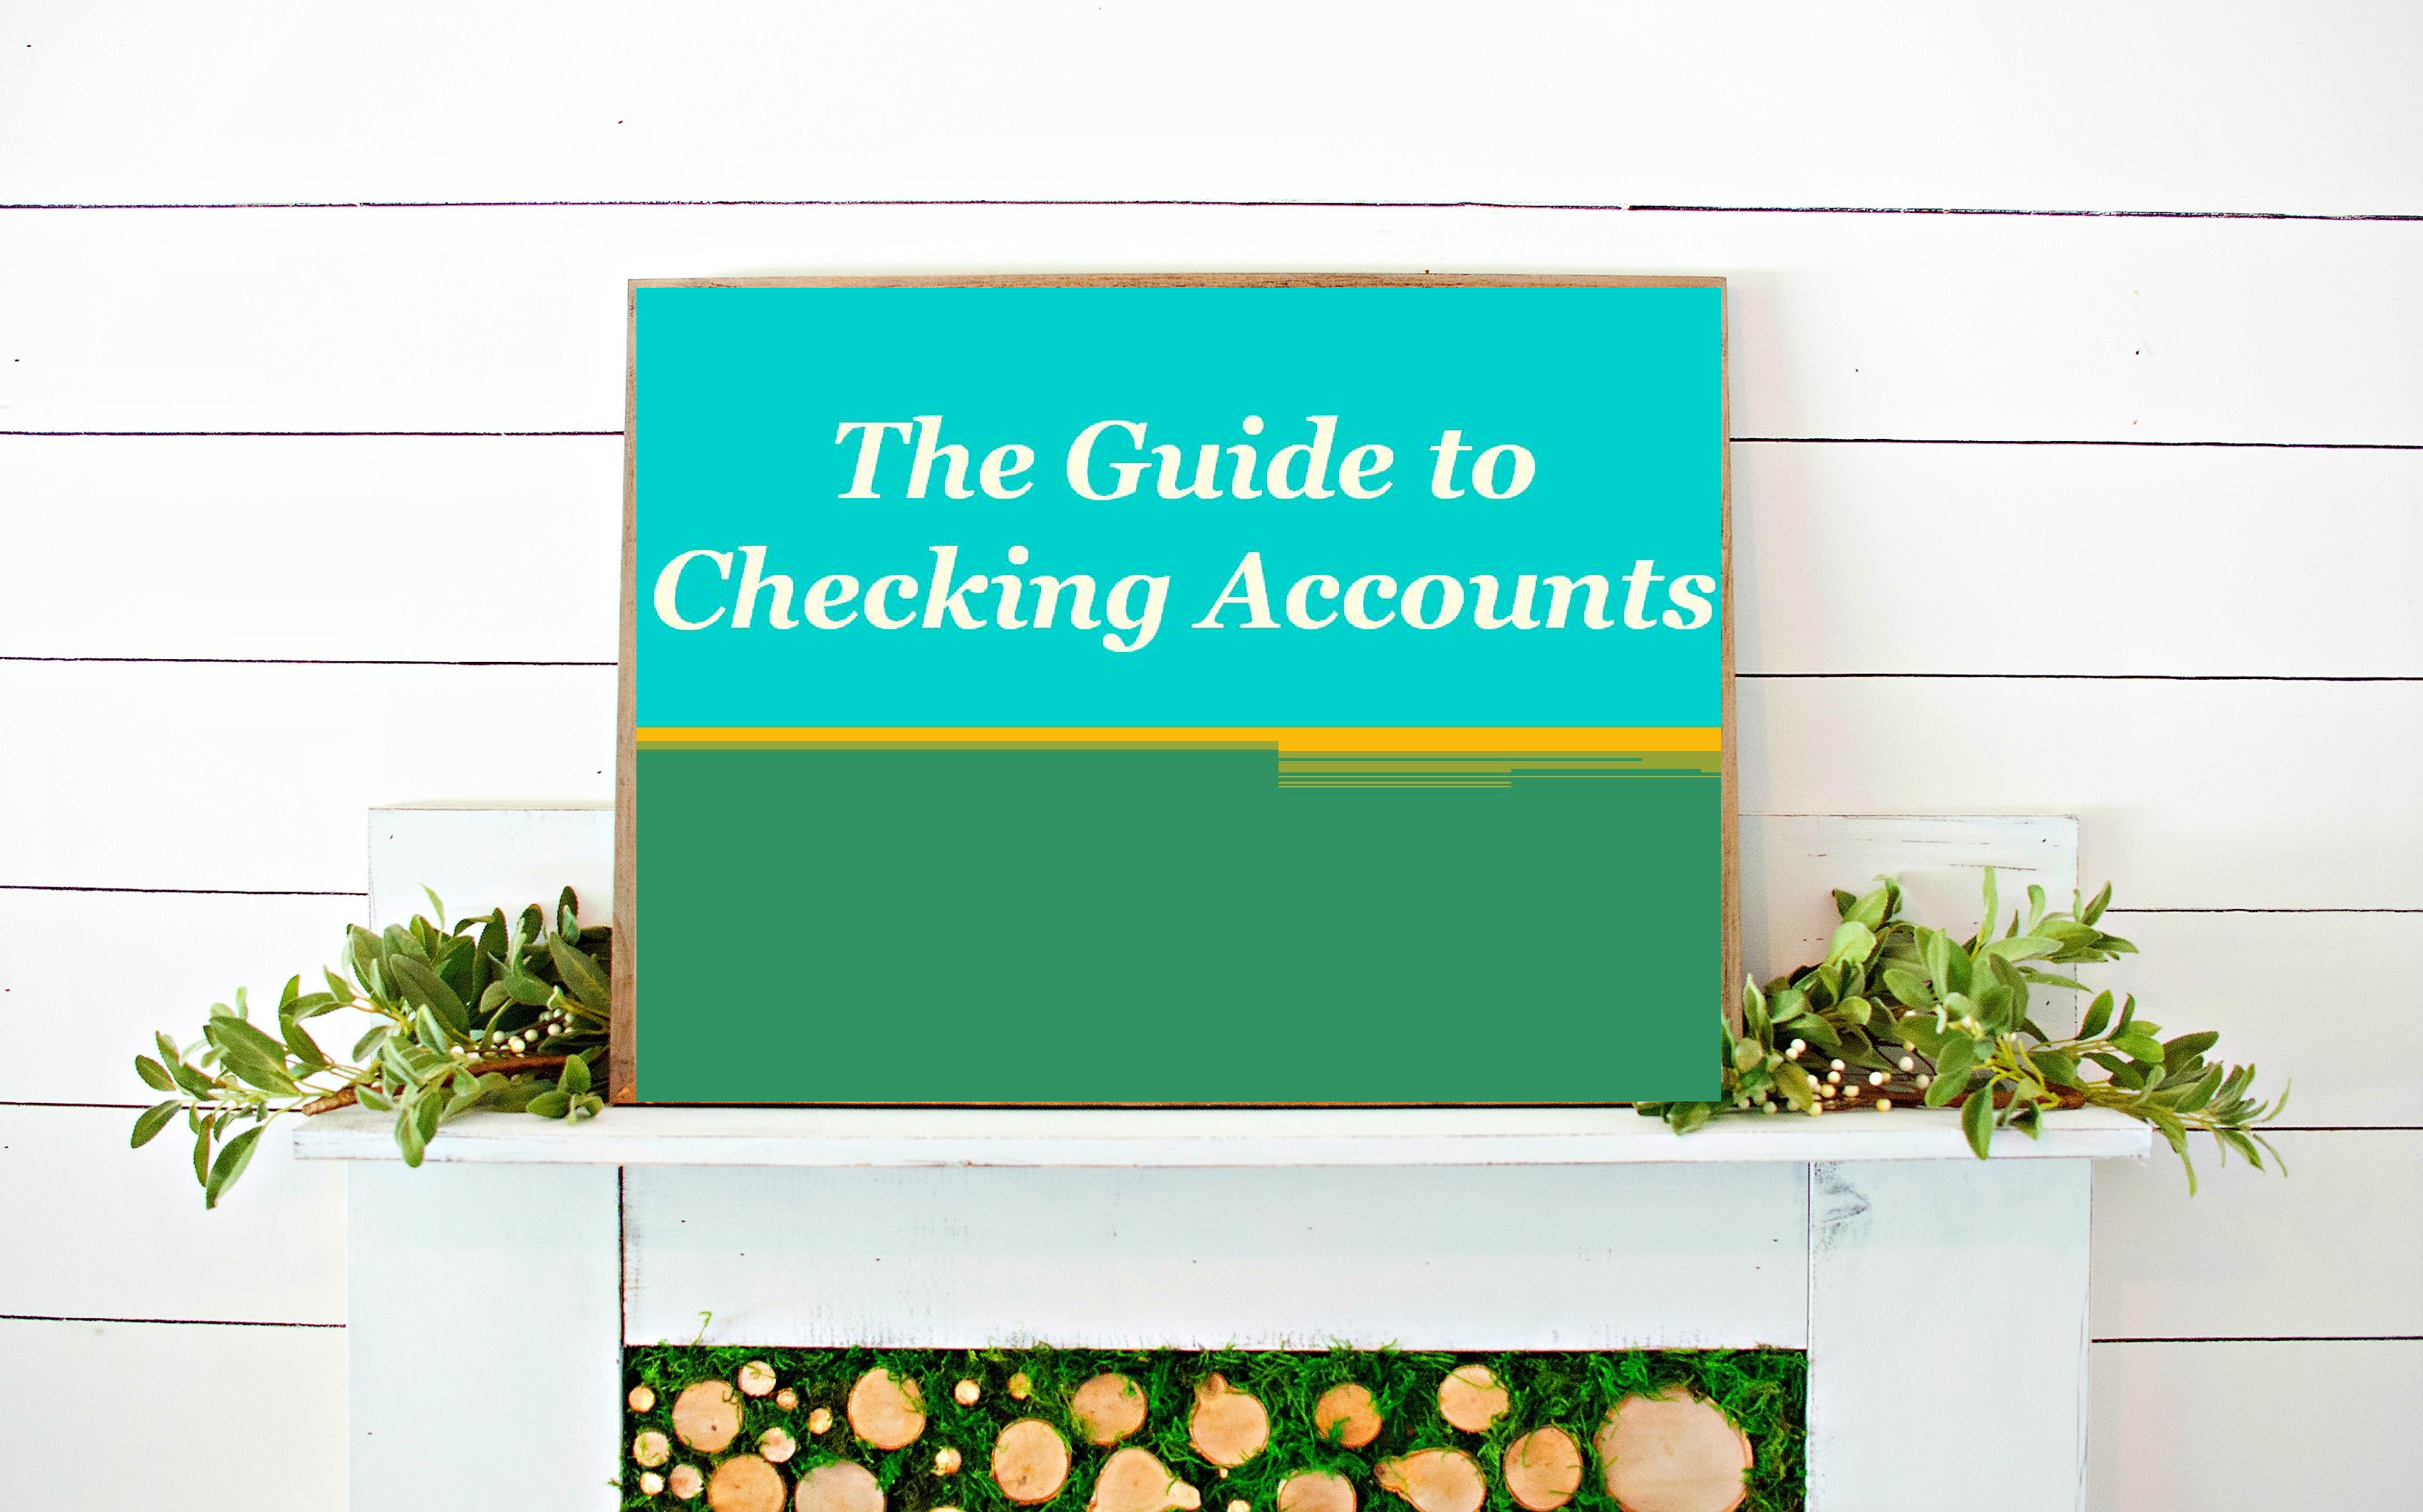 Personal Finance: The Guide to Checking Accounts//powerpoint//dave ramsey//budgeting//finance's featured image